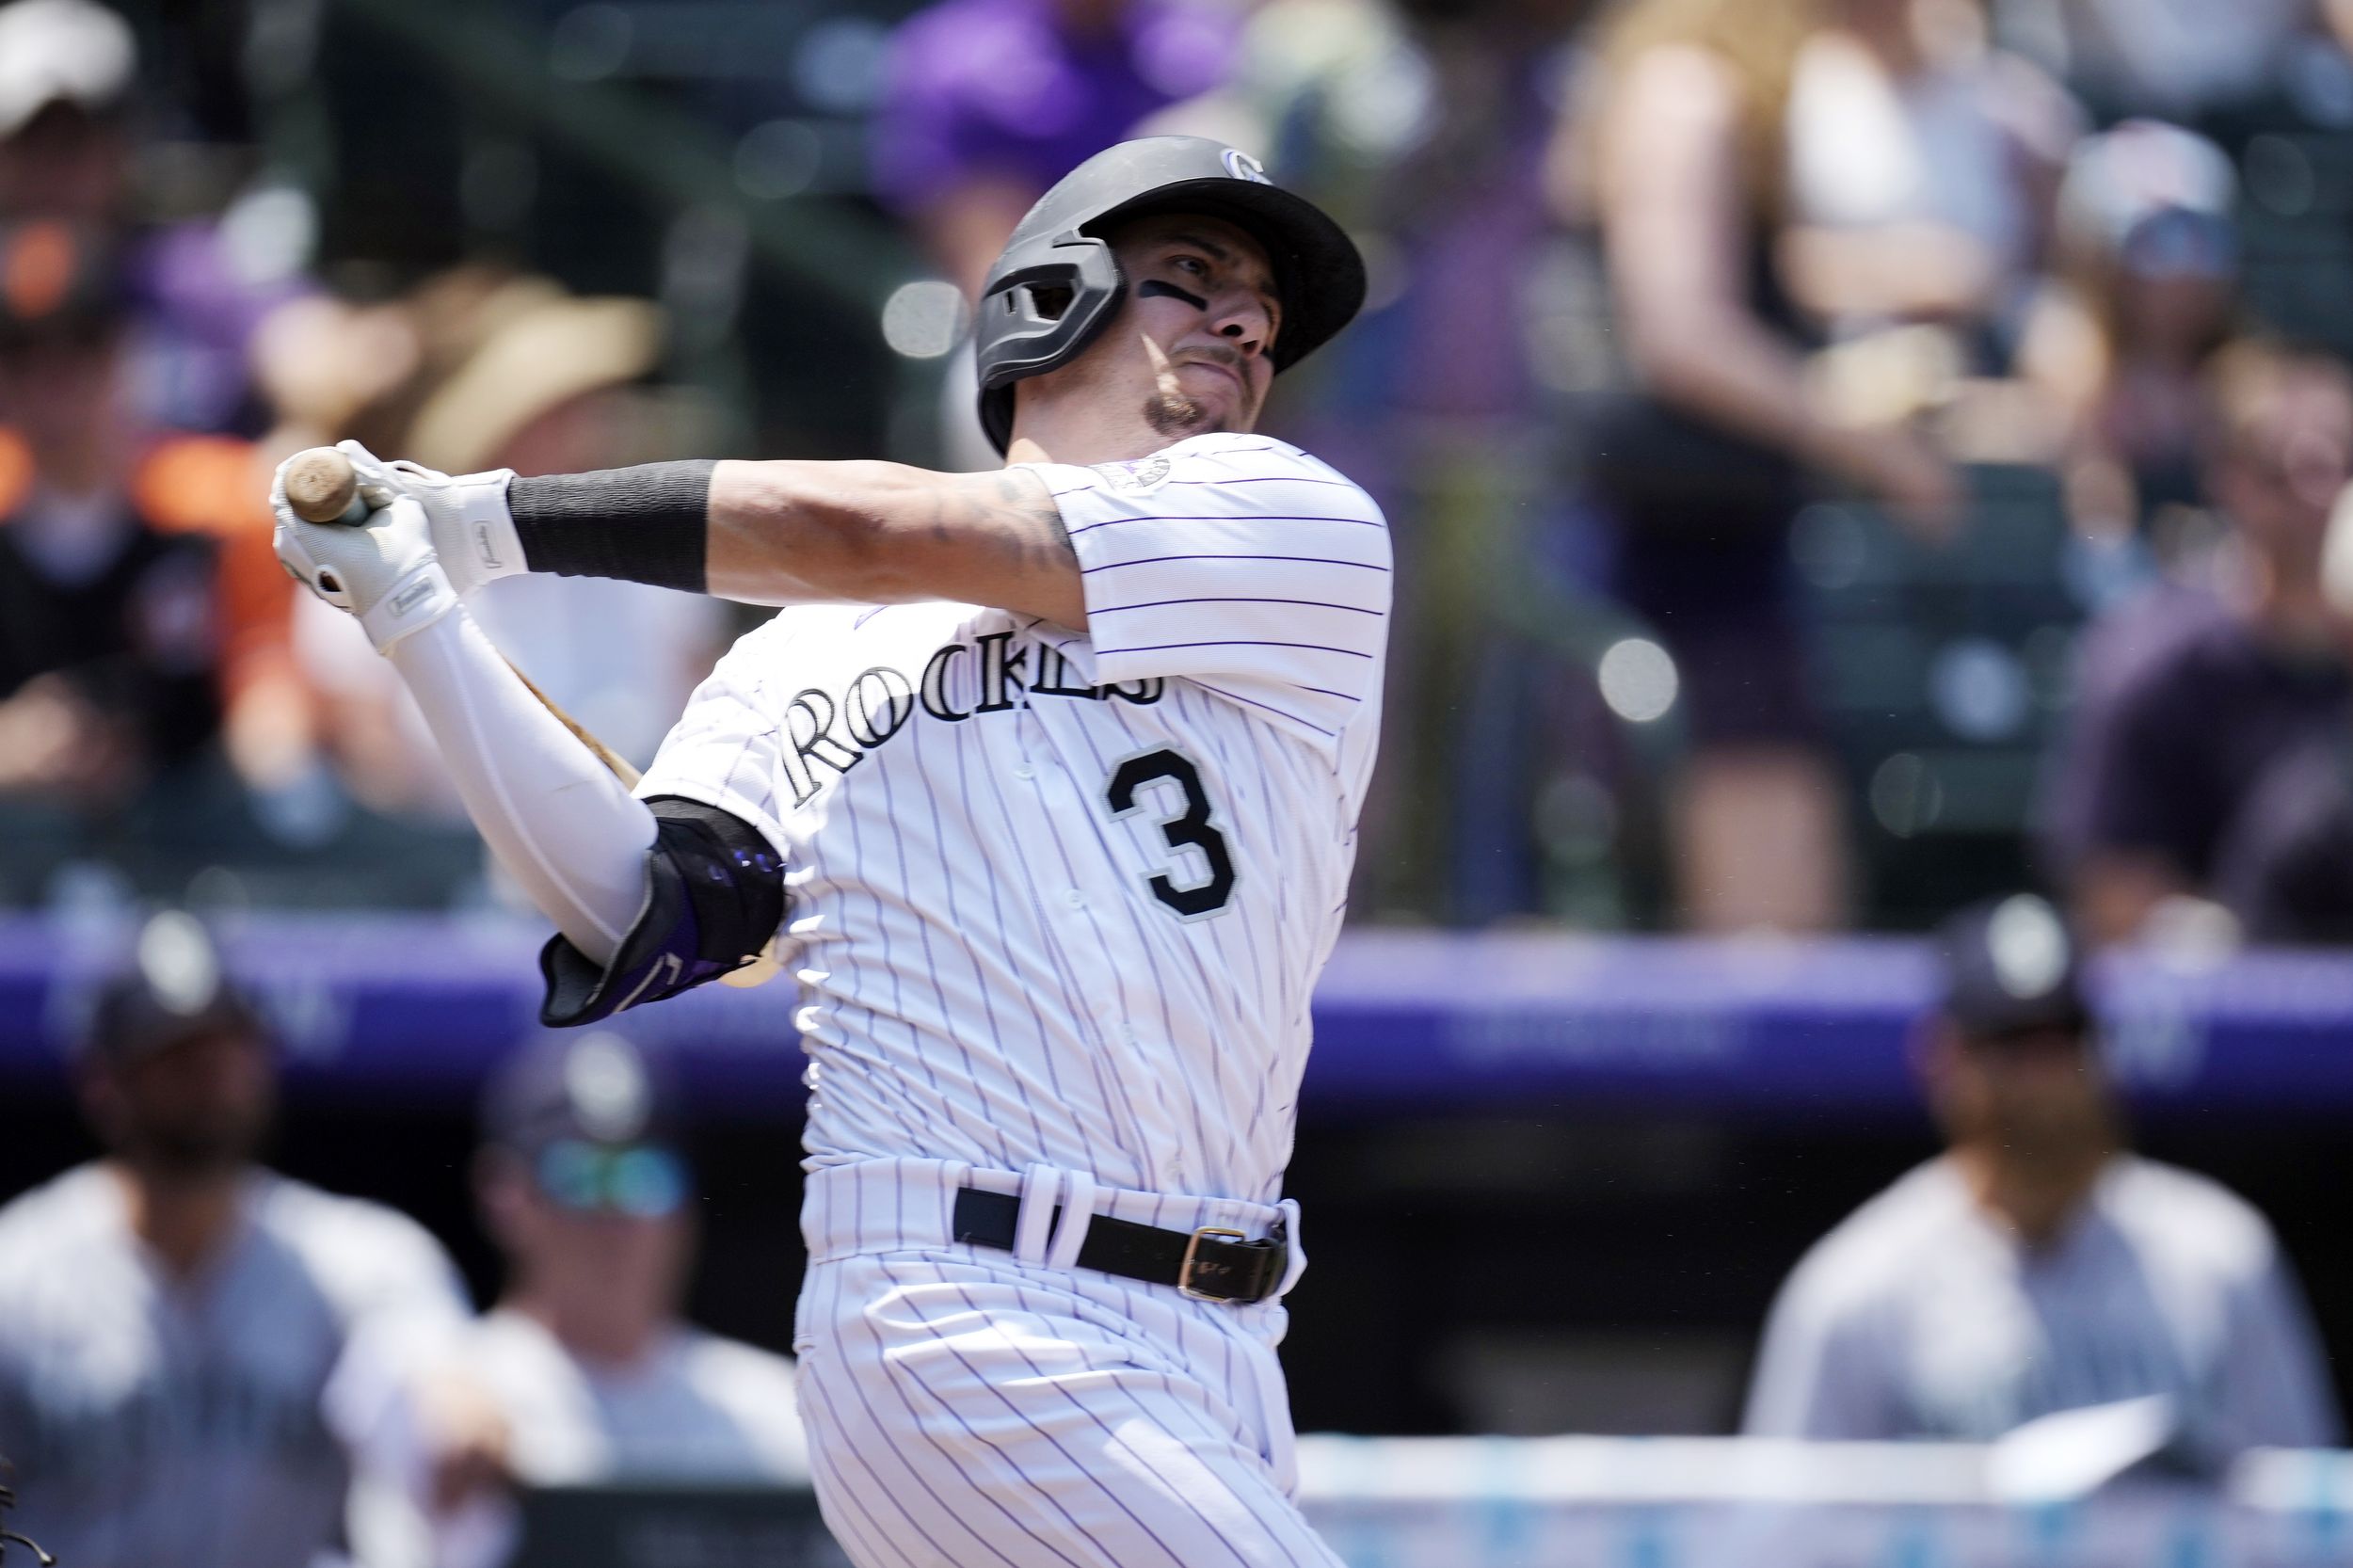 Austin Gomber leads Rockies to first series win in St. Louis since 2009, National Sports